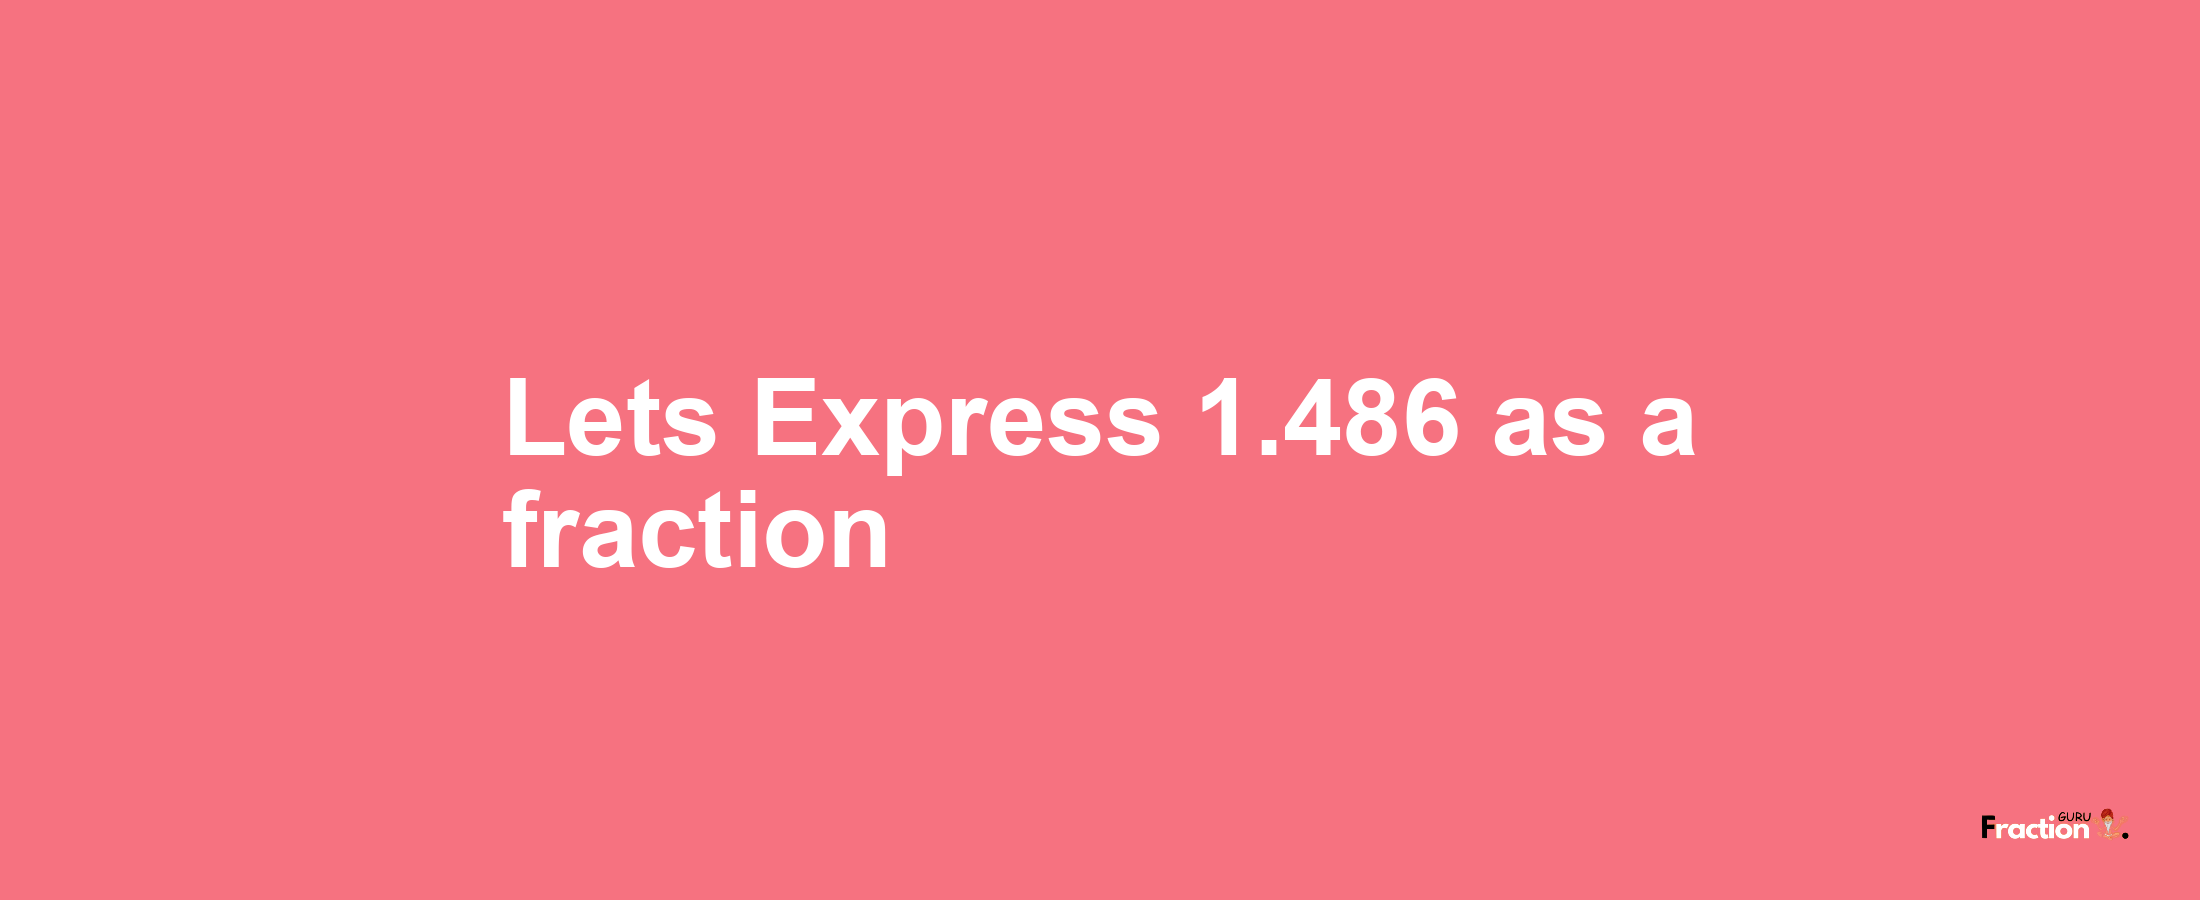 Lets Express 1.486 as afraction